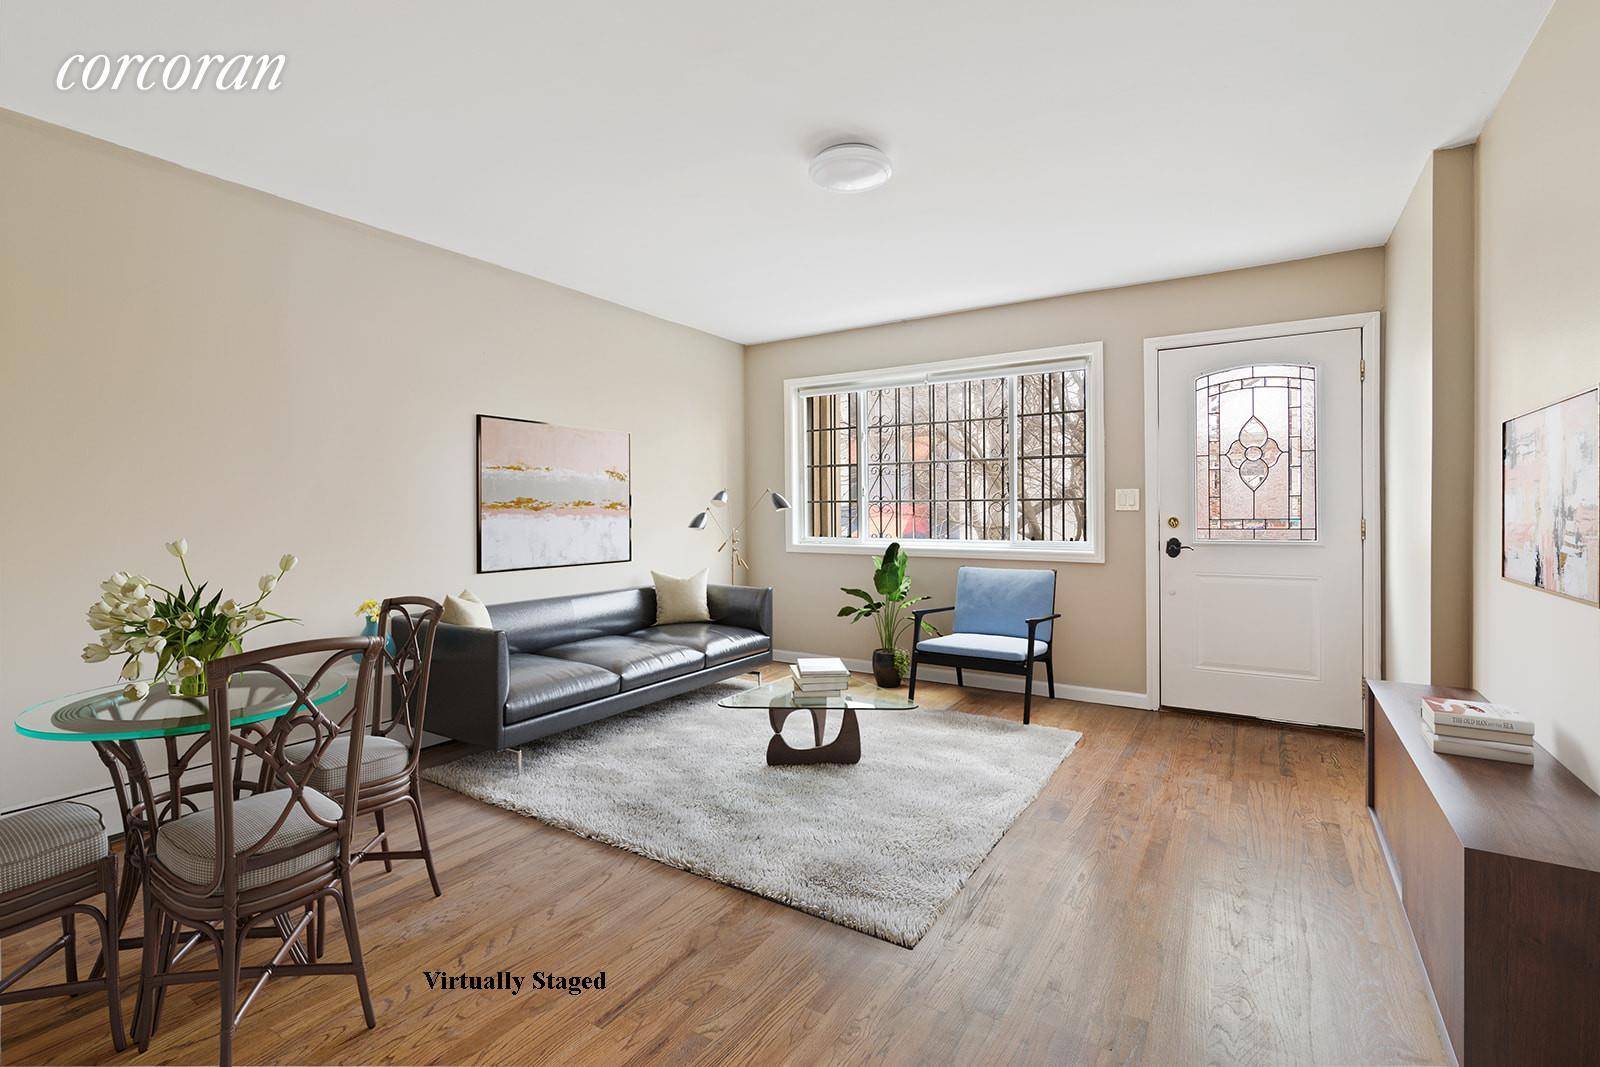 Located in thriving Bushwick, this 3 story 3 family townhouse with brick faA ade was built in 2007 and consists of 3 floor through apartments that each contain 2 bedrooms, ...